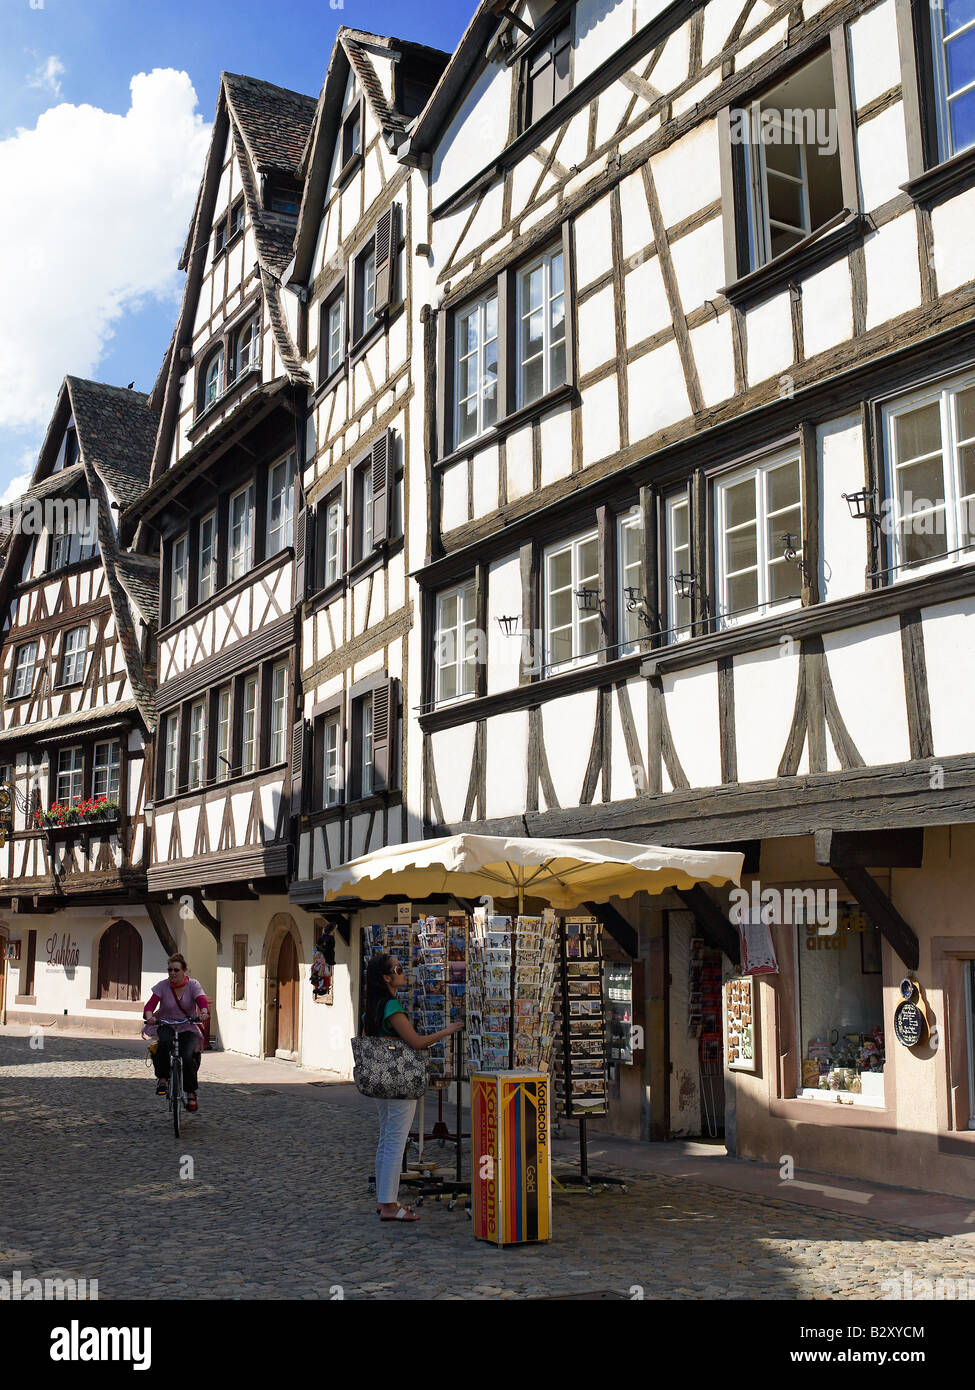 RENAISSANCE HALF-TIMBERED HOUSES 16th Century LA PETITE FRANCE DISTRICT STRASBOURG ALSACE FRANCE EUROPE Stock Photo